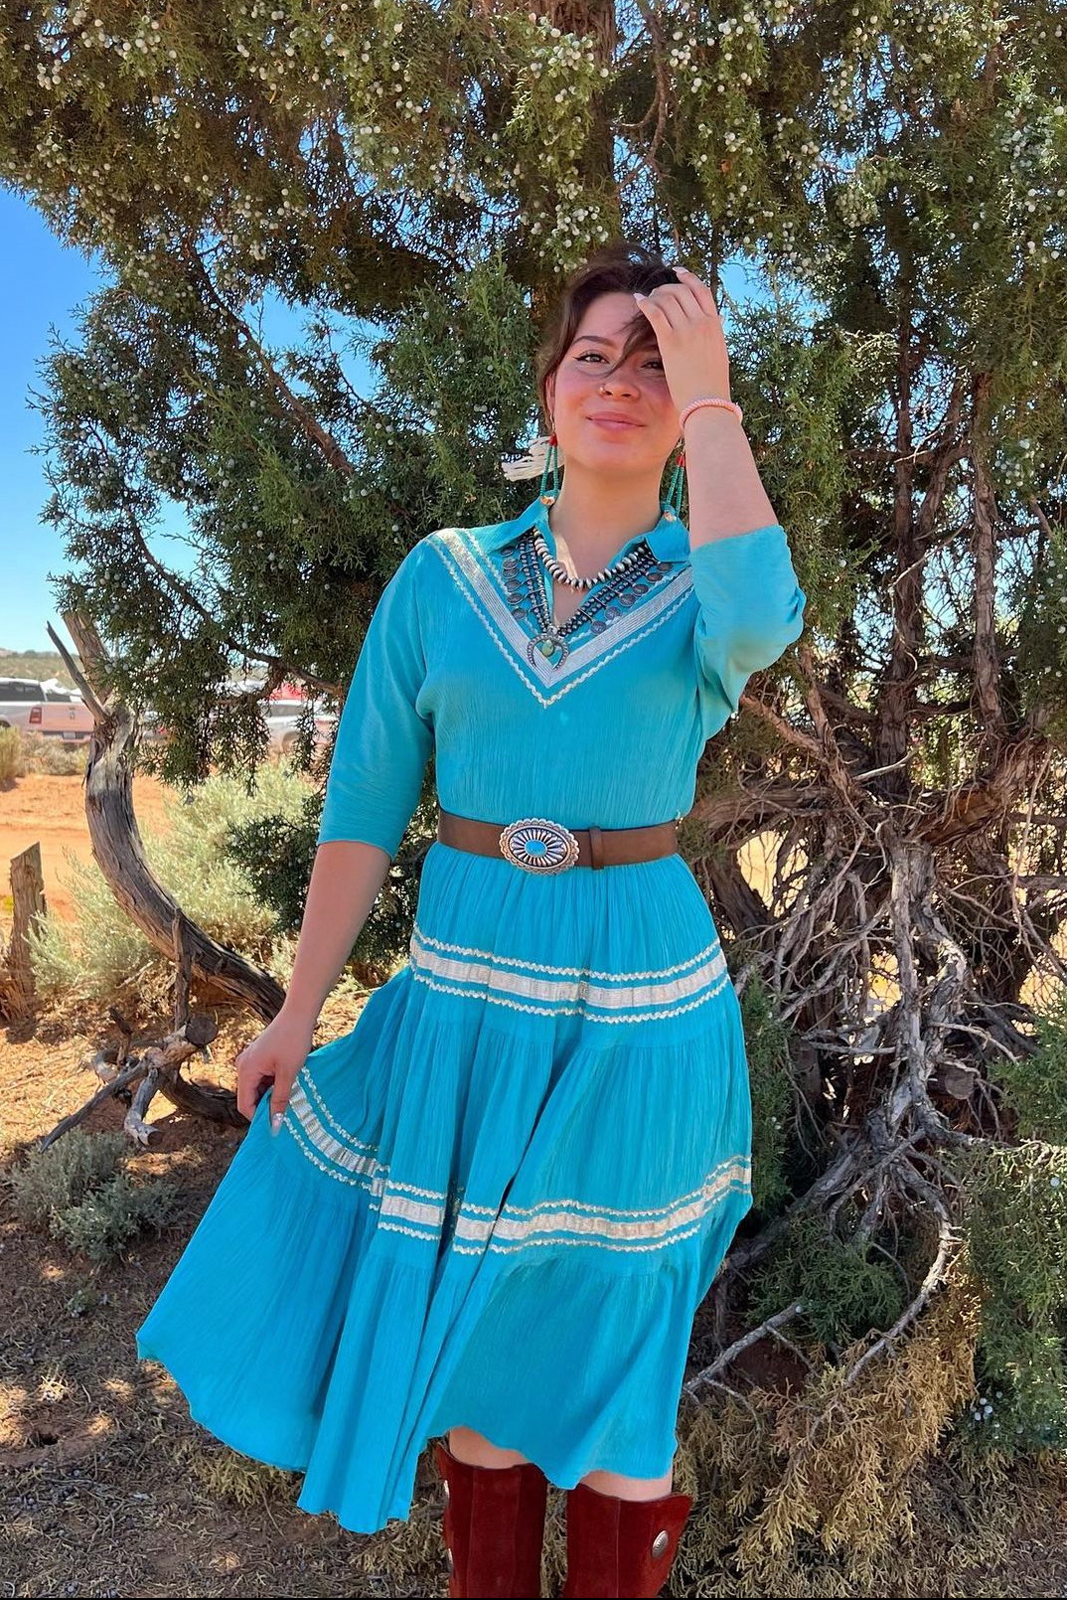 Hueston stands in against a juniper tree in the desert wearing a turquoise dress